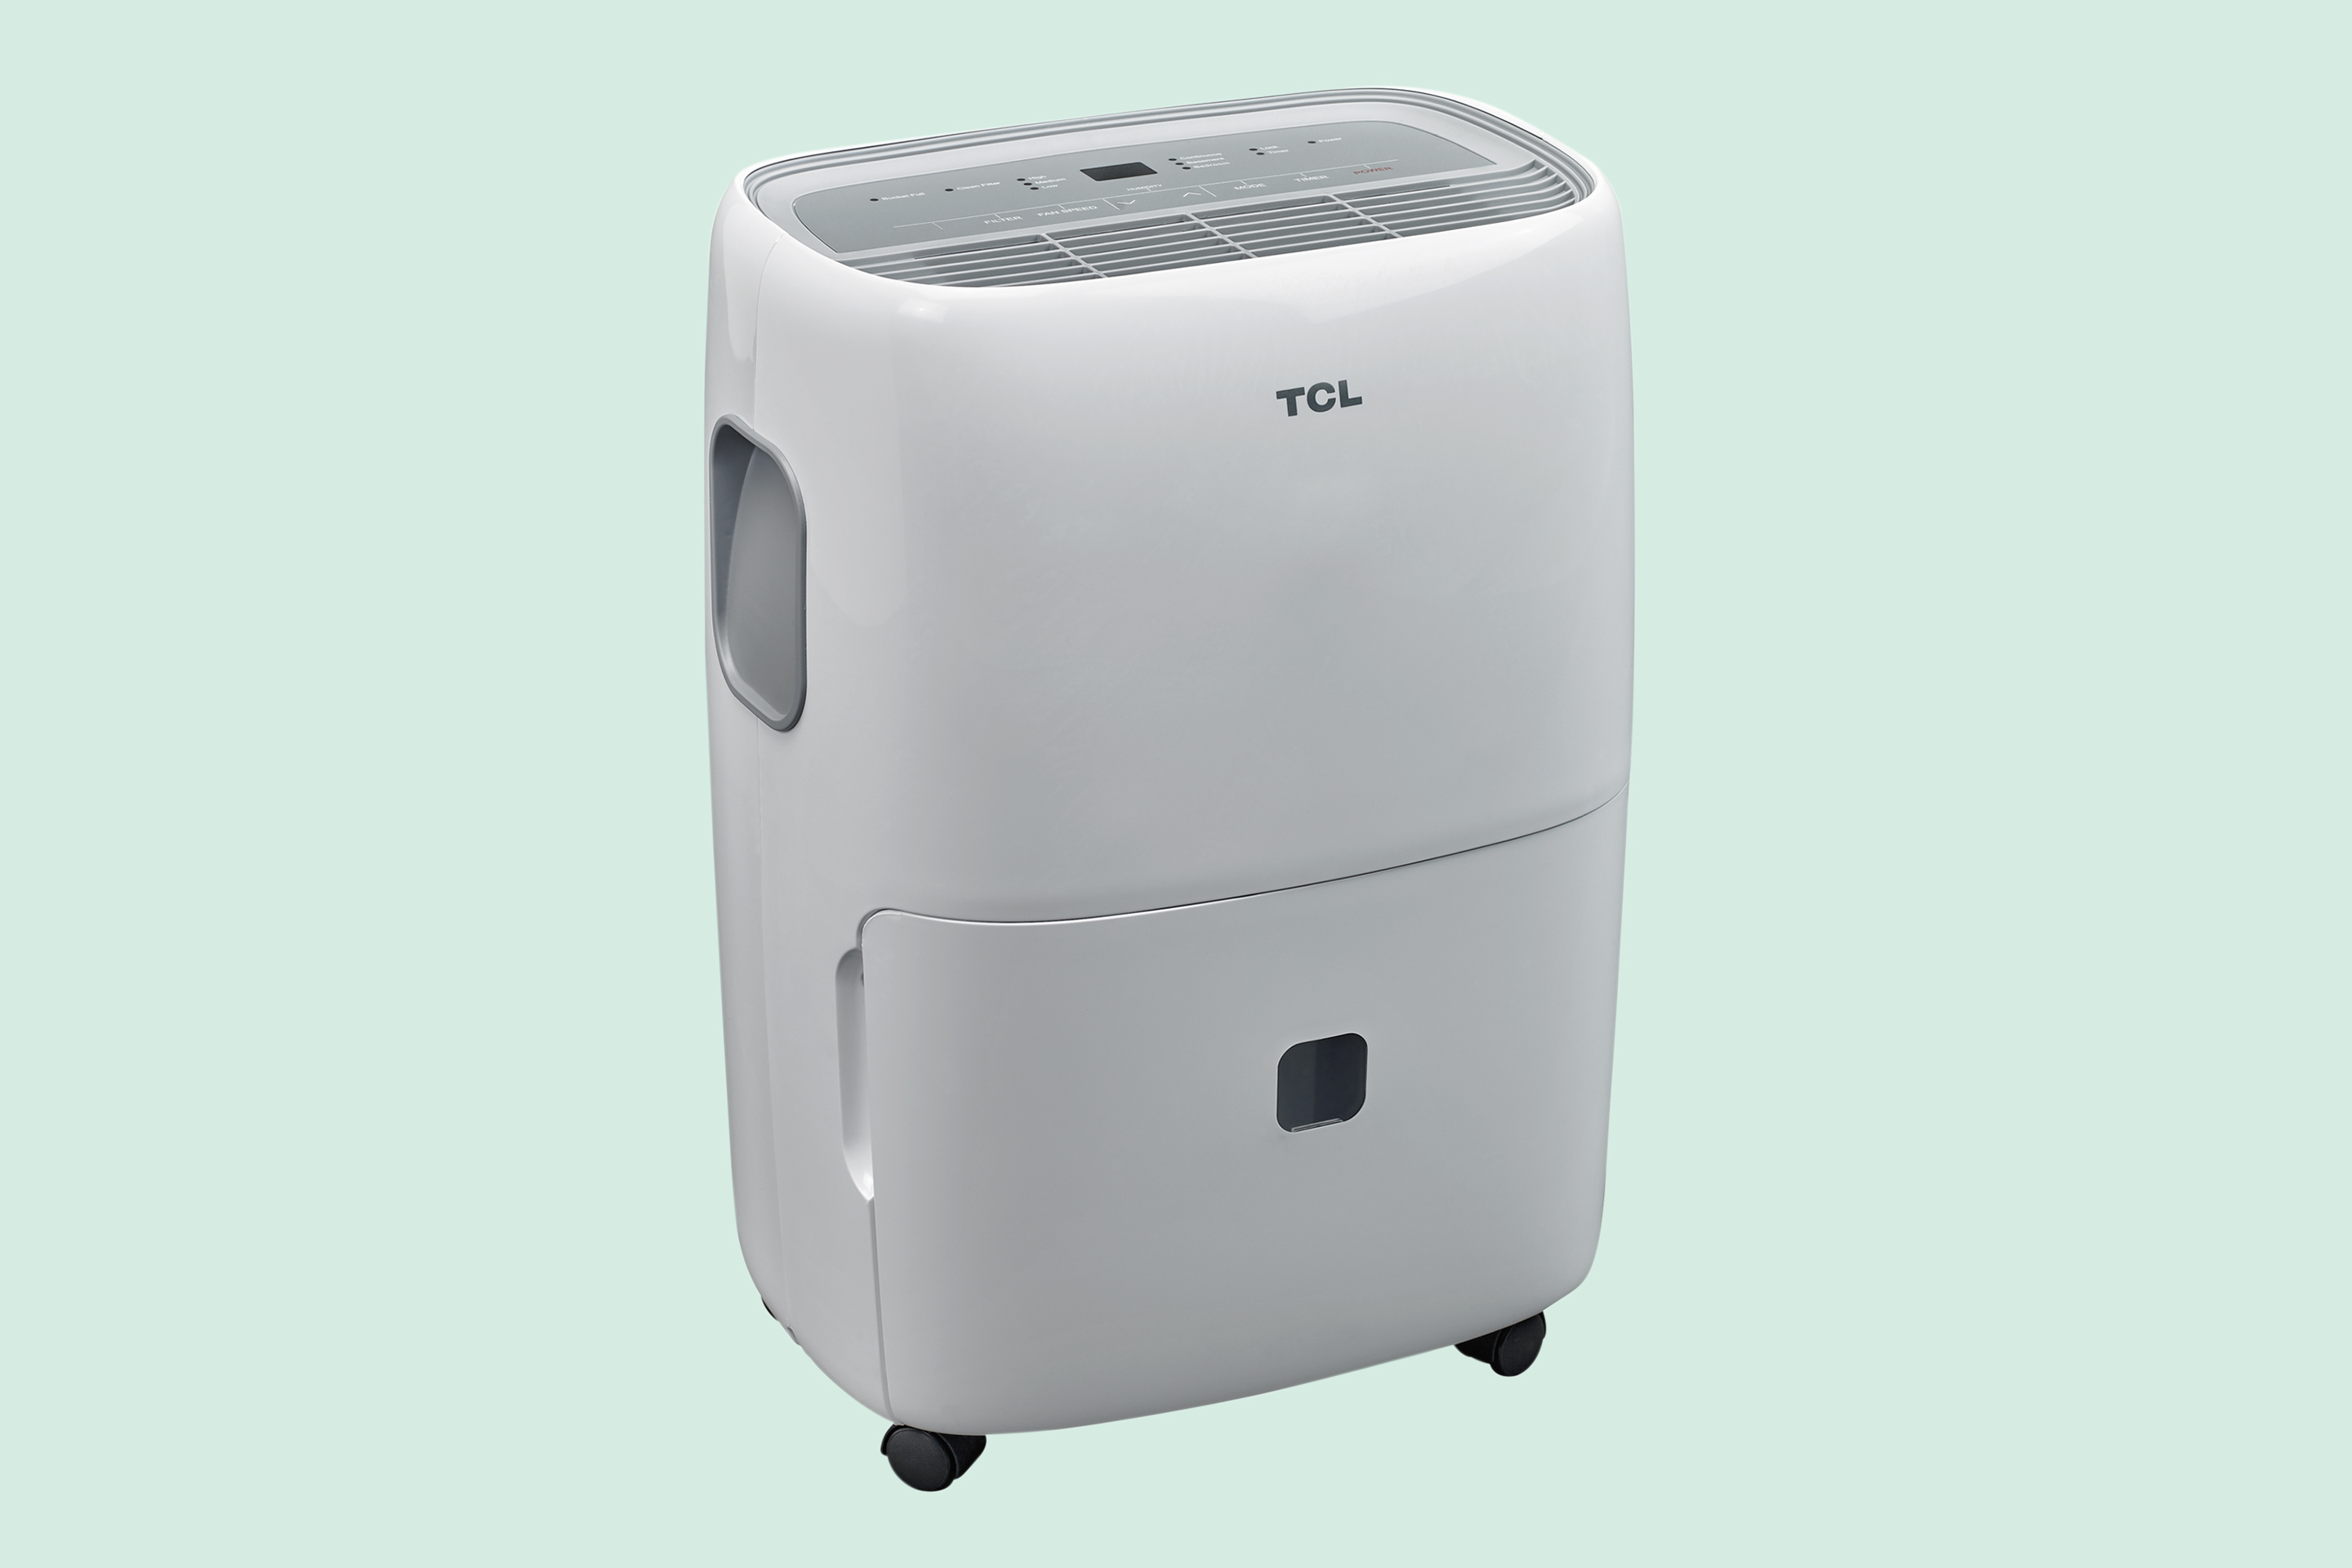 6 best affordable dehumidifiers under $100 in 2021